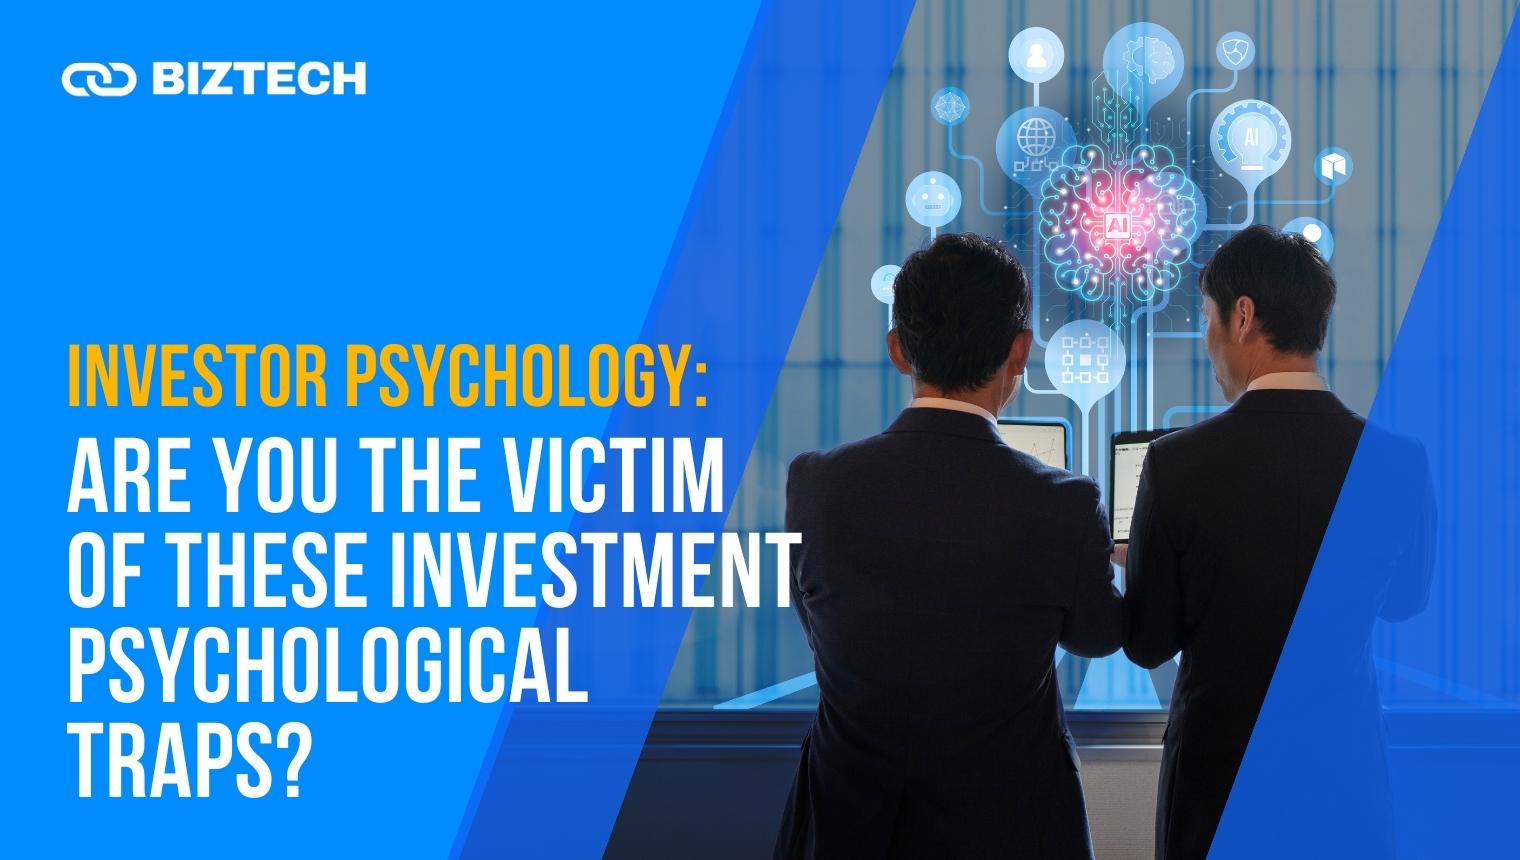 Investor Psychology: Are You The Victim of These Investment Psychological Traps?